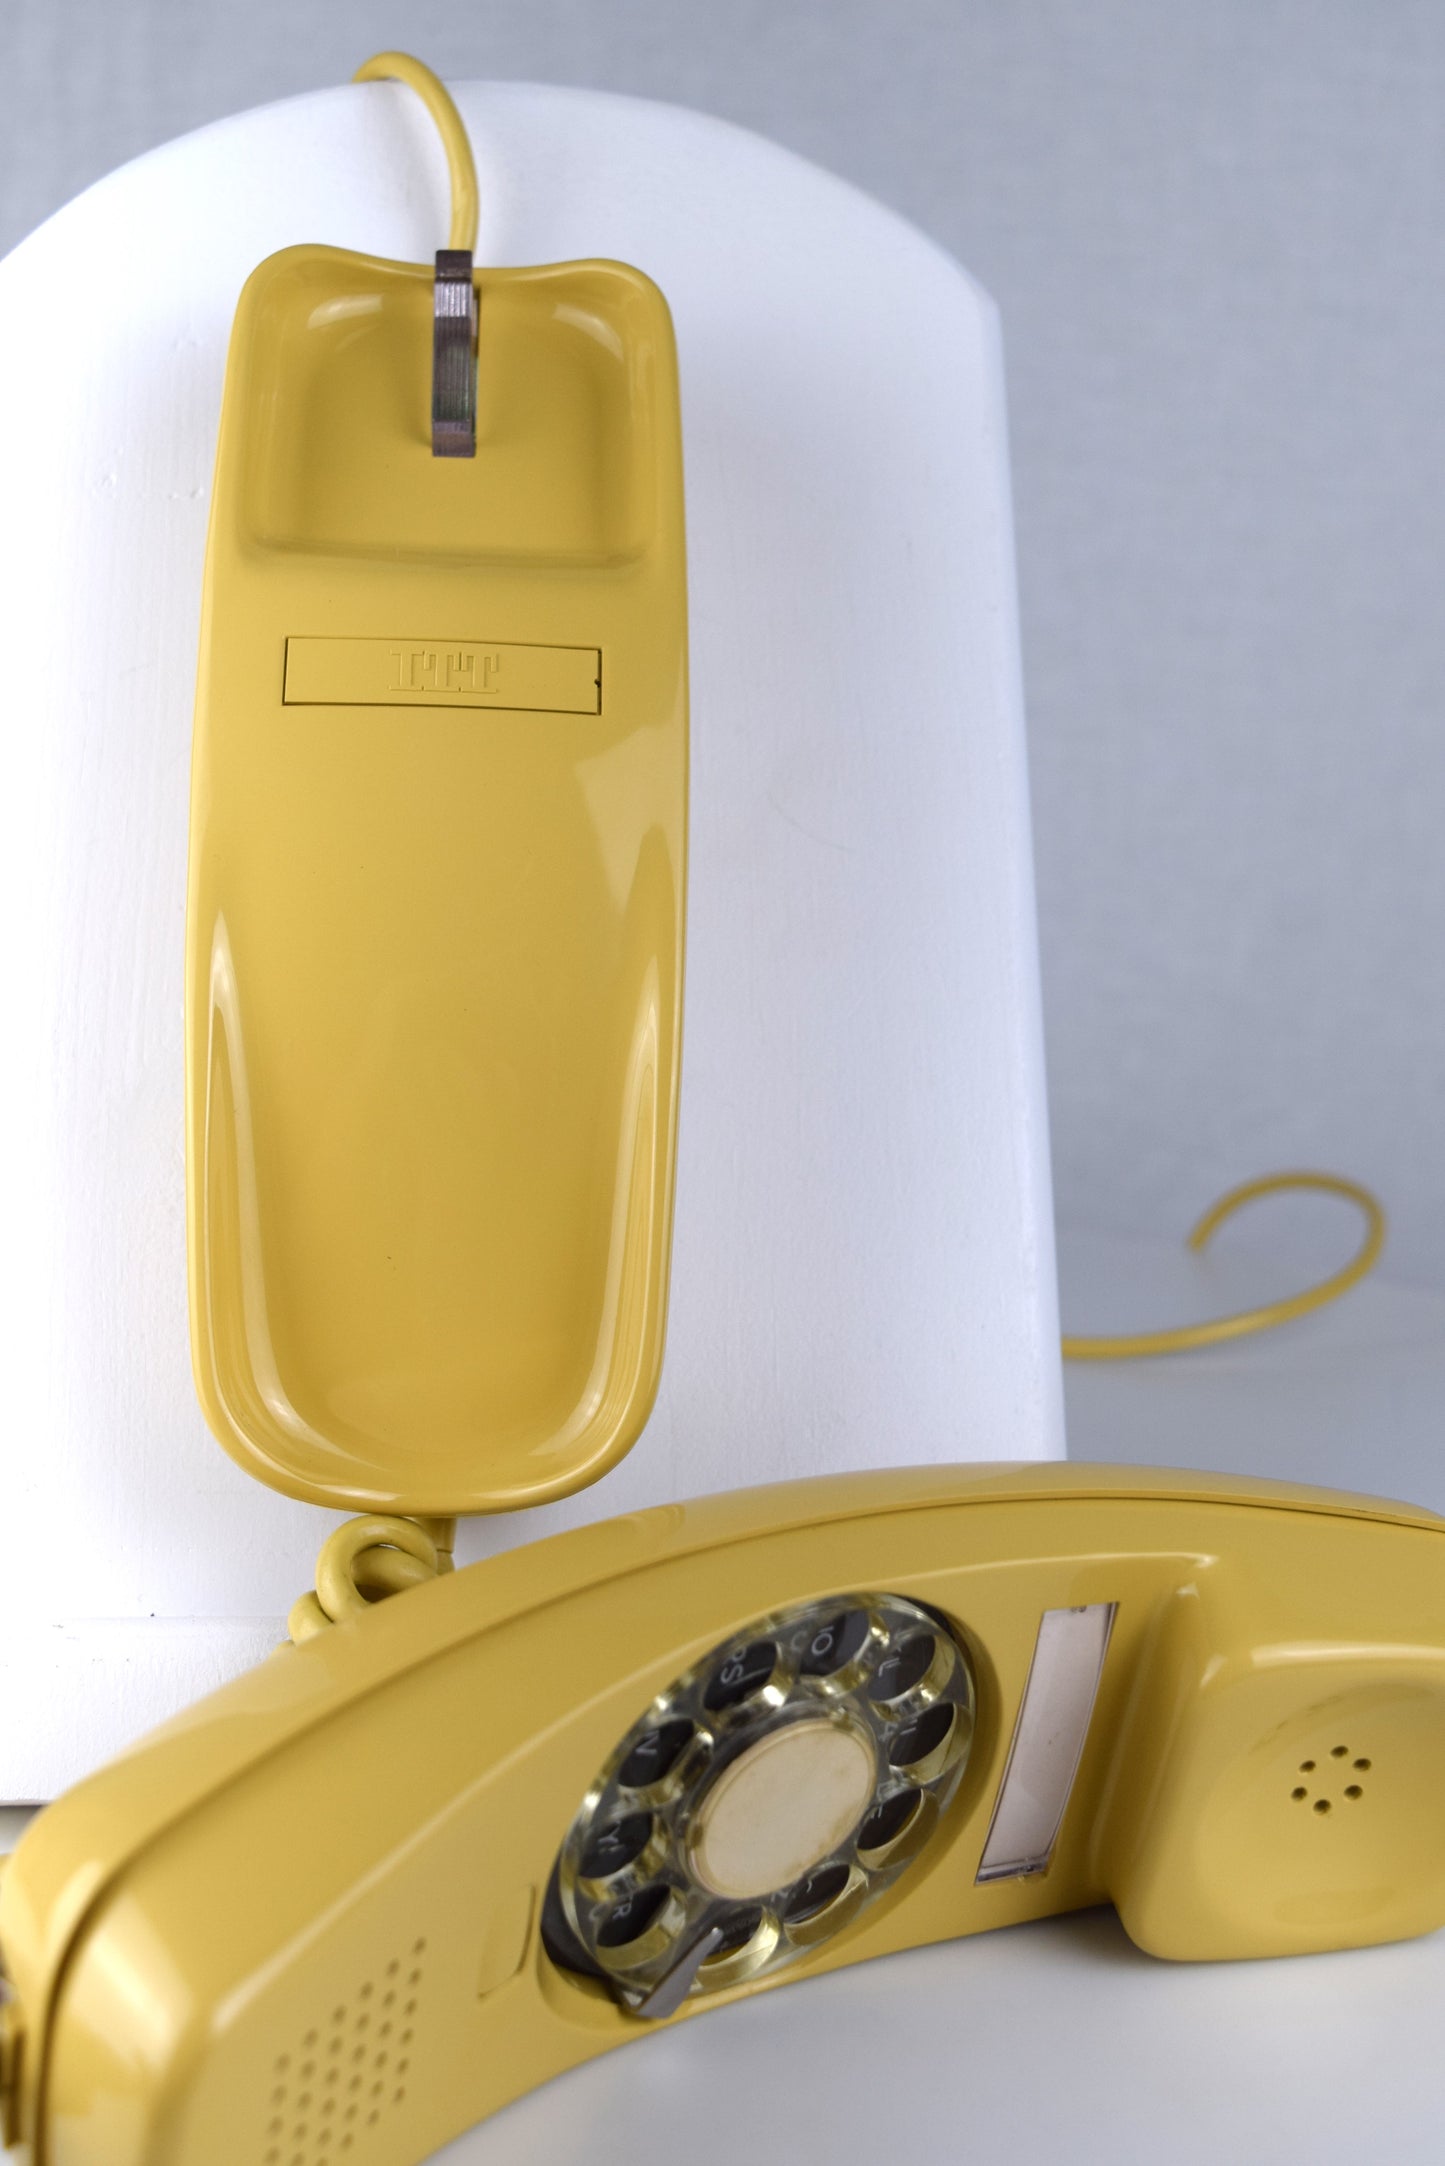 Trimline - Harvest Gold - Rotary Dial Wall Phone